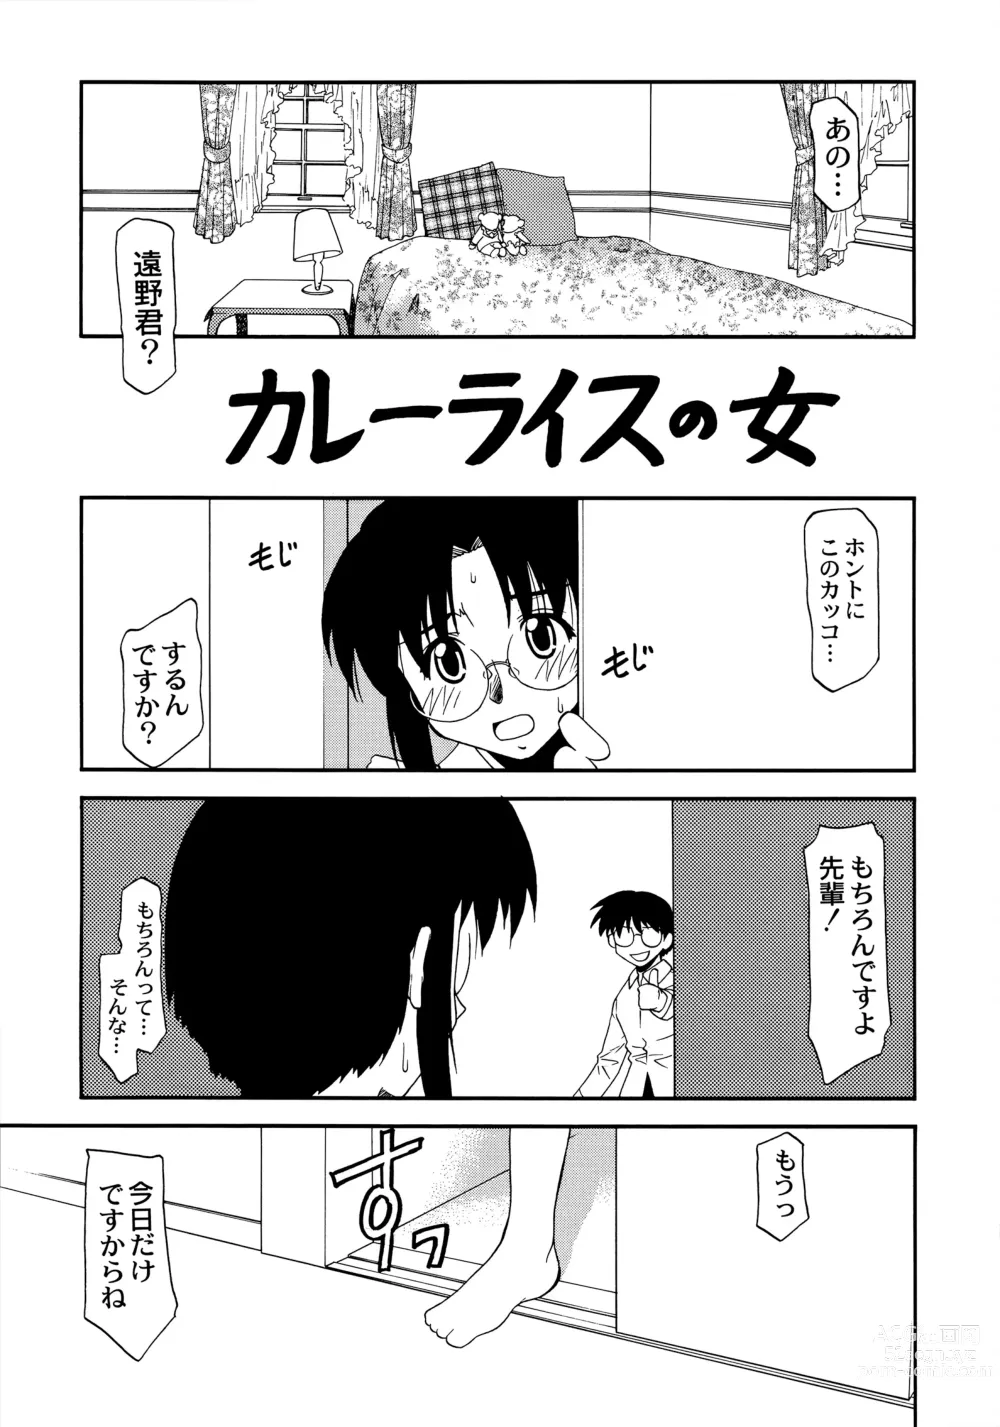 Page 2 of doujinshi Curry Rice no Onna